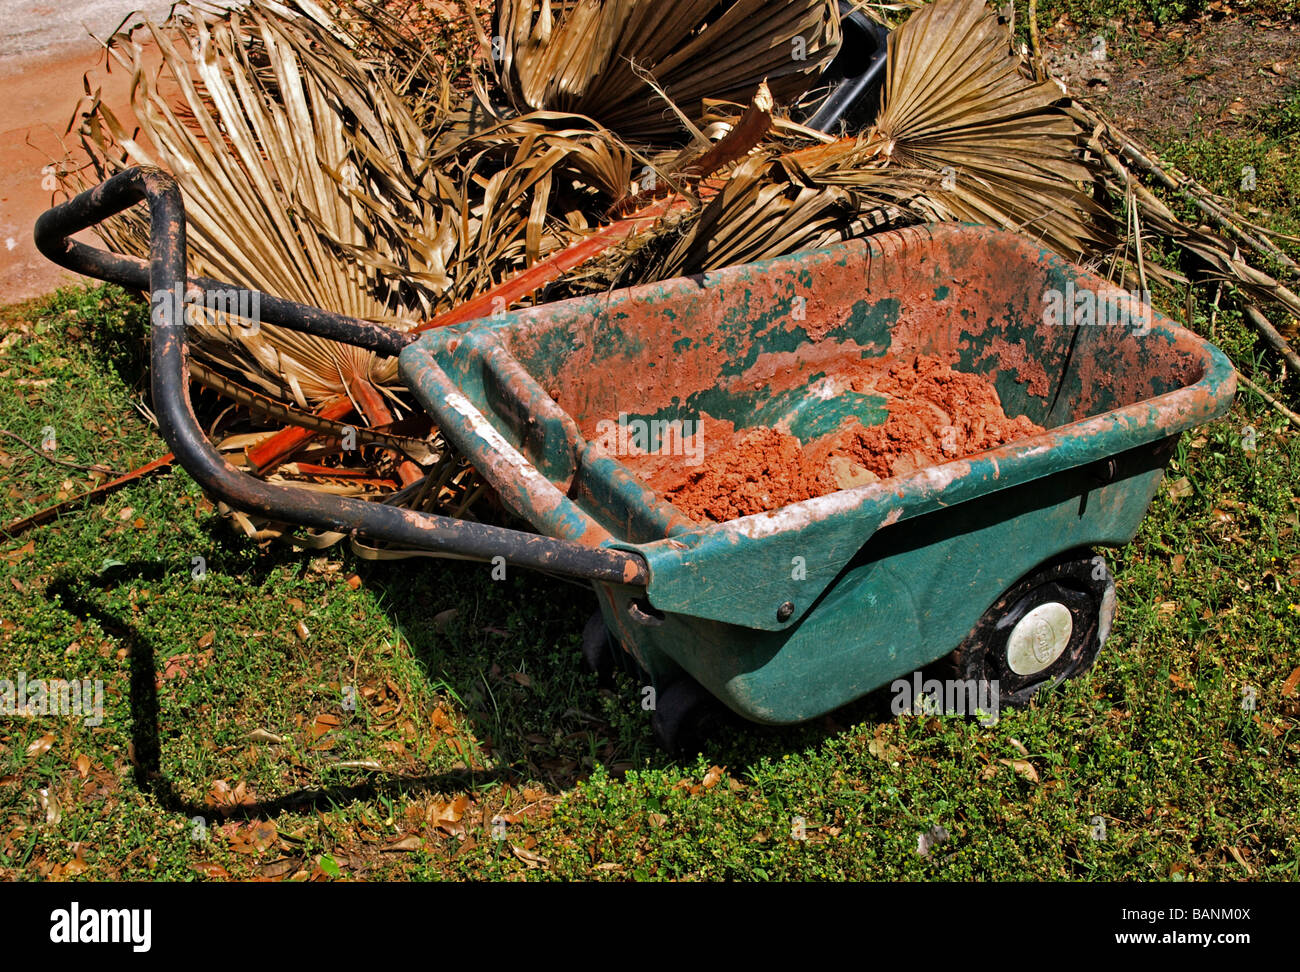 plastic wheelbarrow carrier with wheels for cement, plaster with metal handle set against dried palm fronds Stock Photo